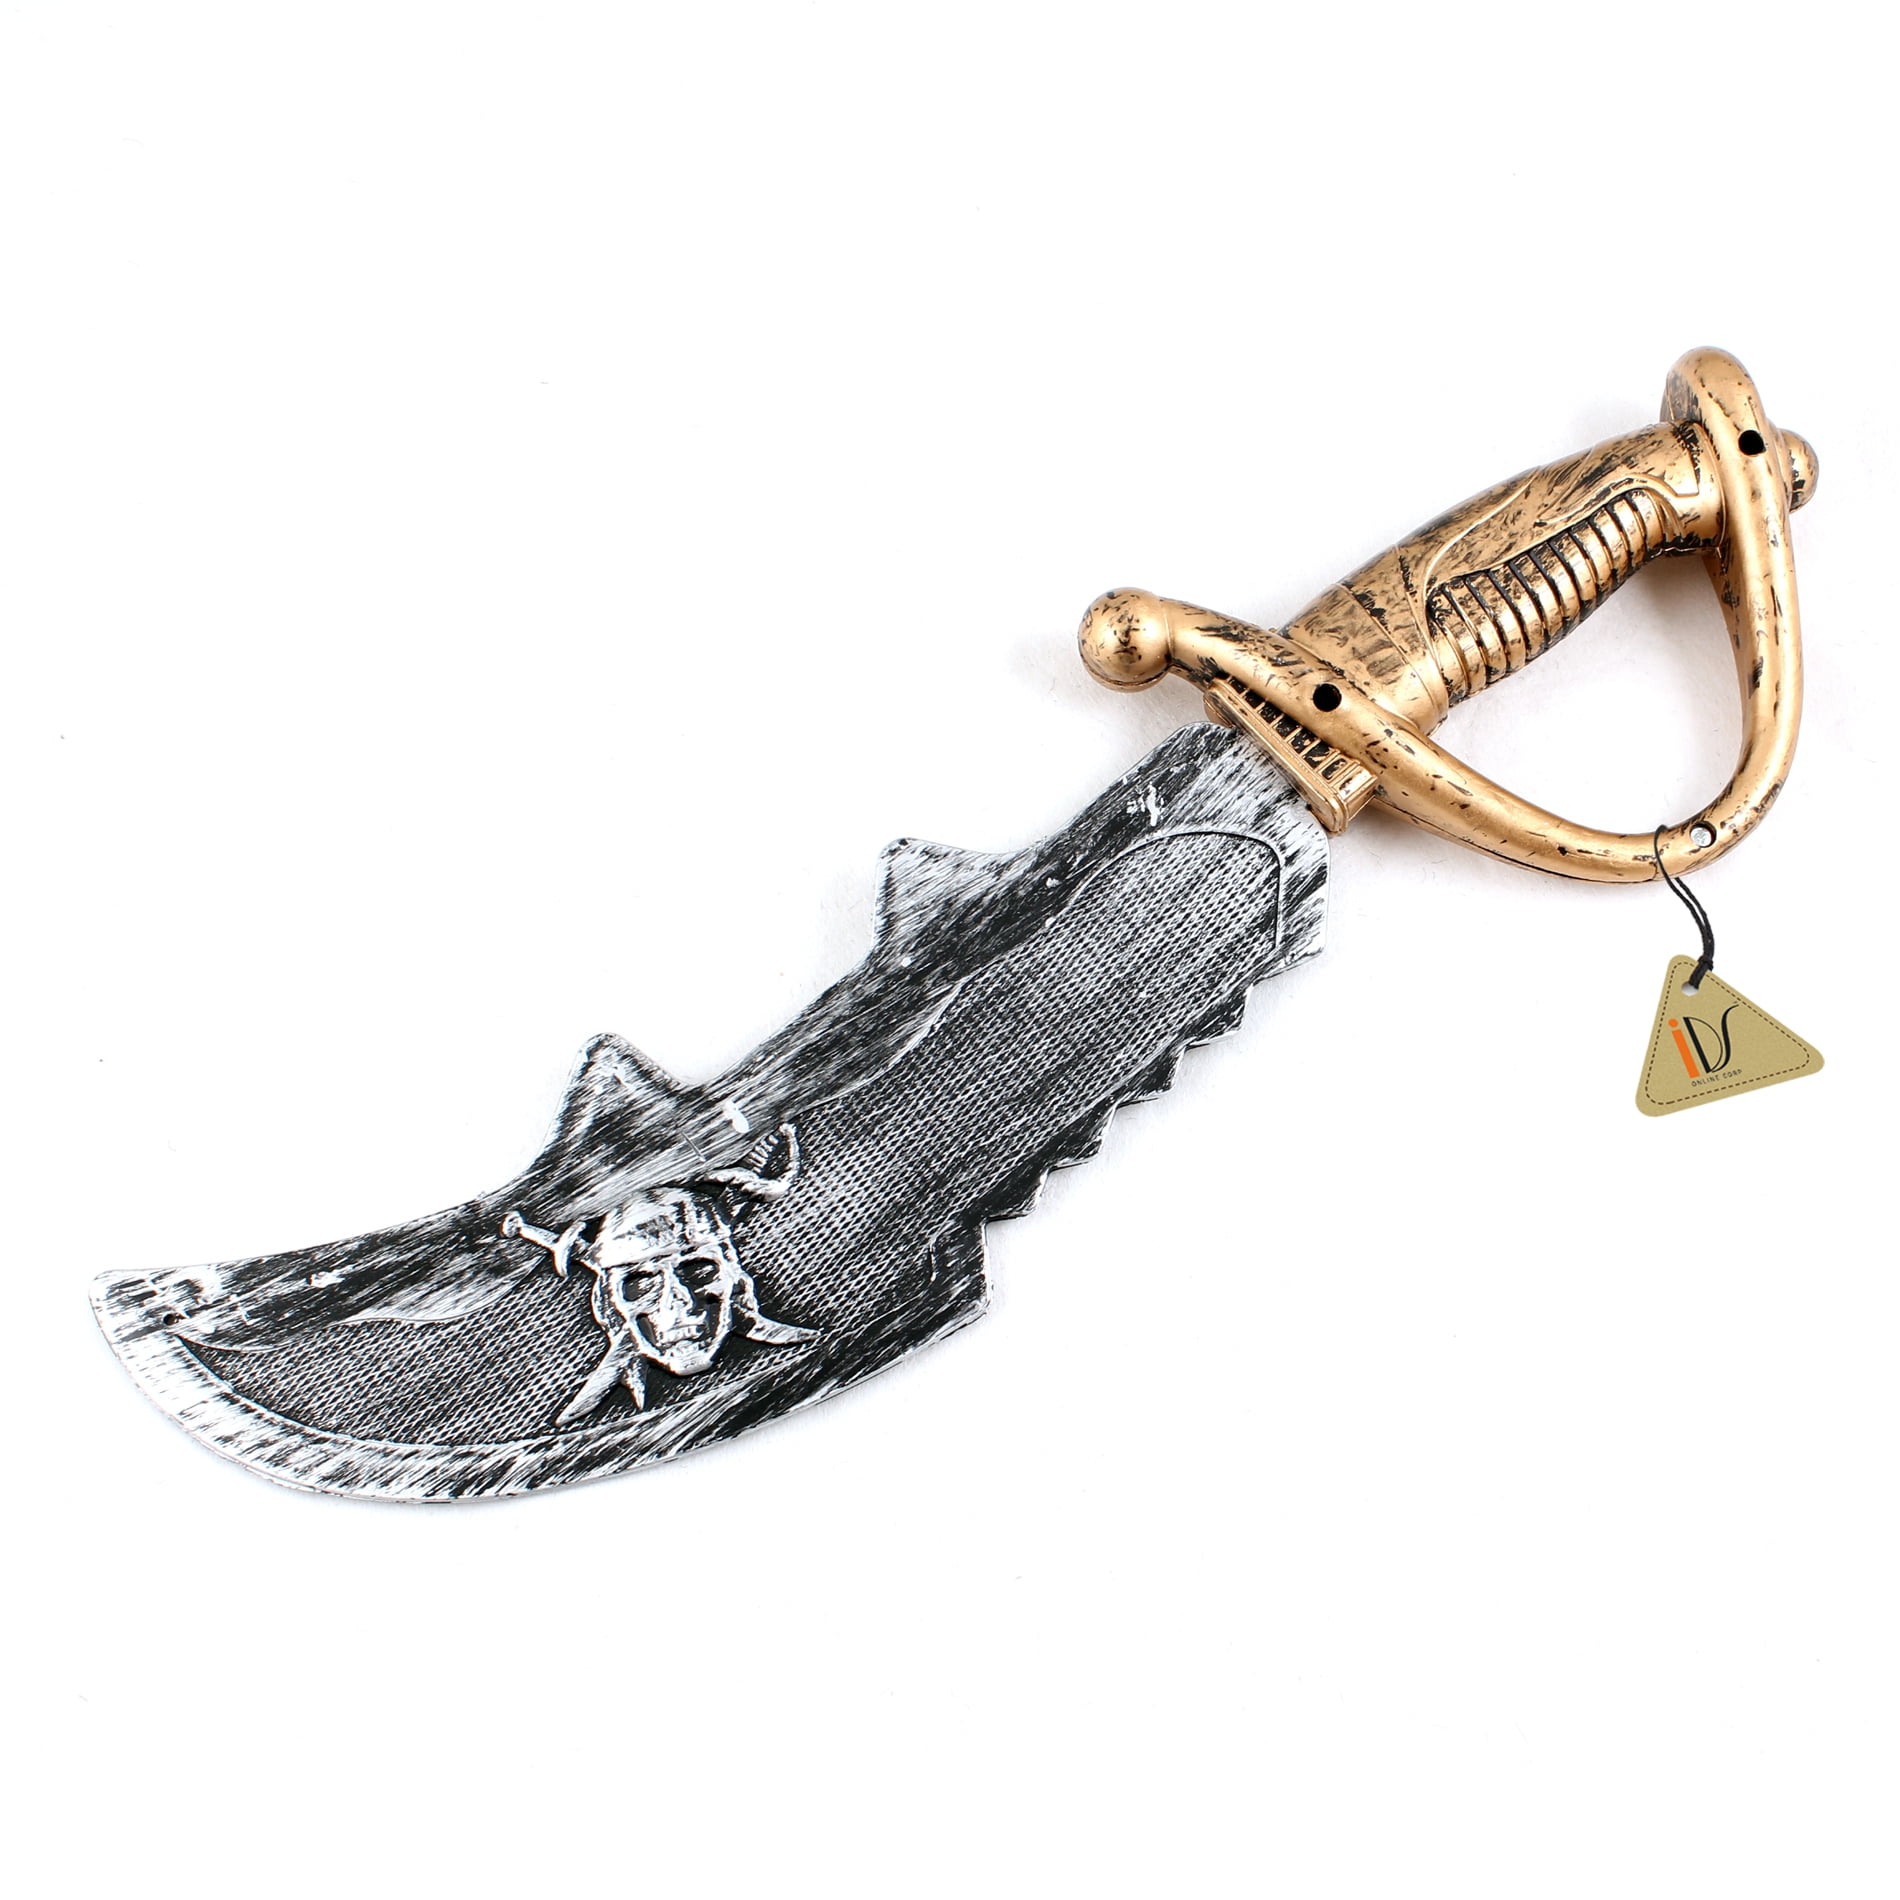 Details about   PIRATE TOY PLASTIC SWORD with EYEPATCH FANCY DRESS COSTUME CARIBBEAN CUTLASS 